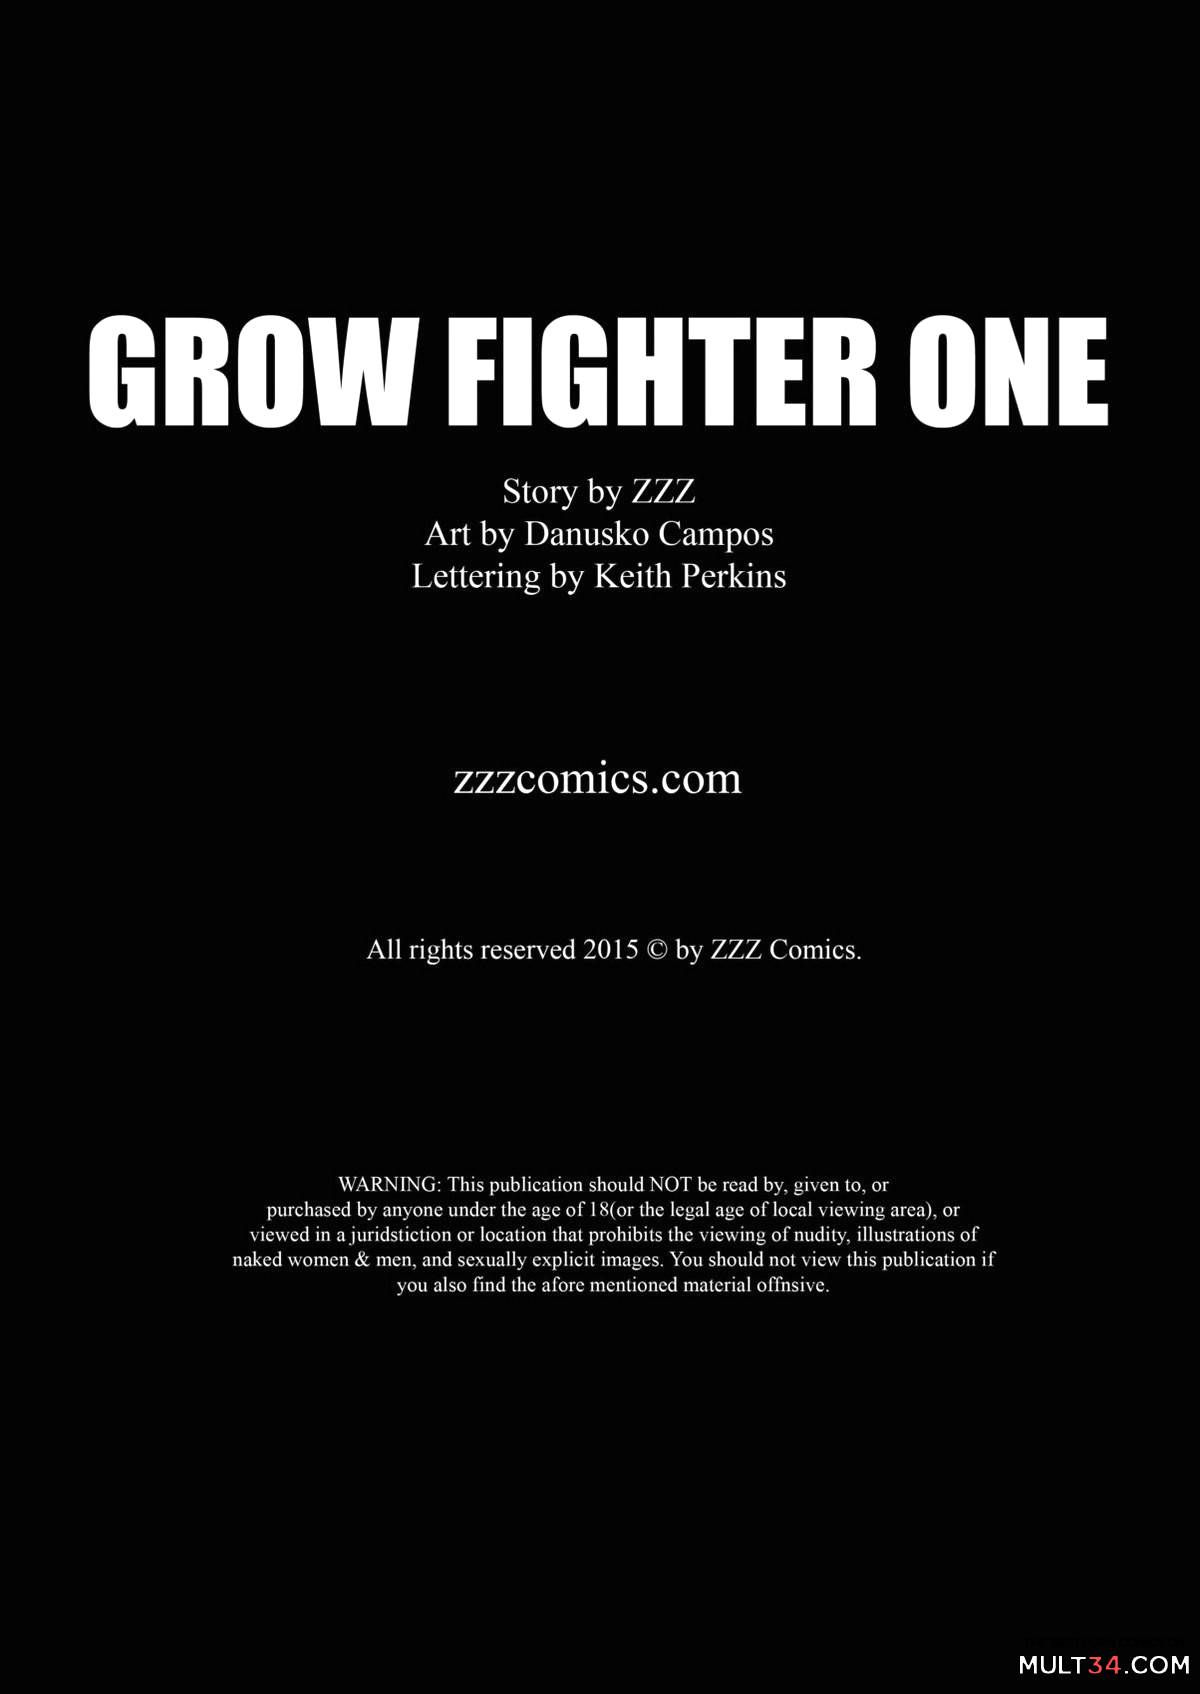 Growfighter One page 2